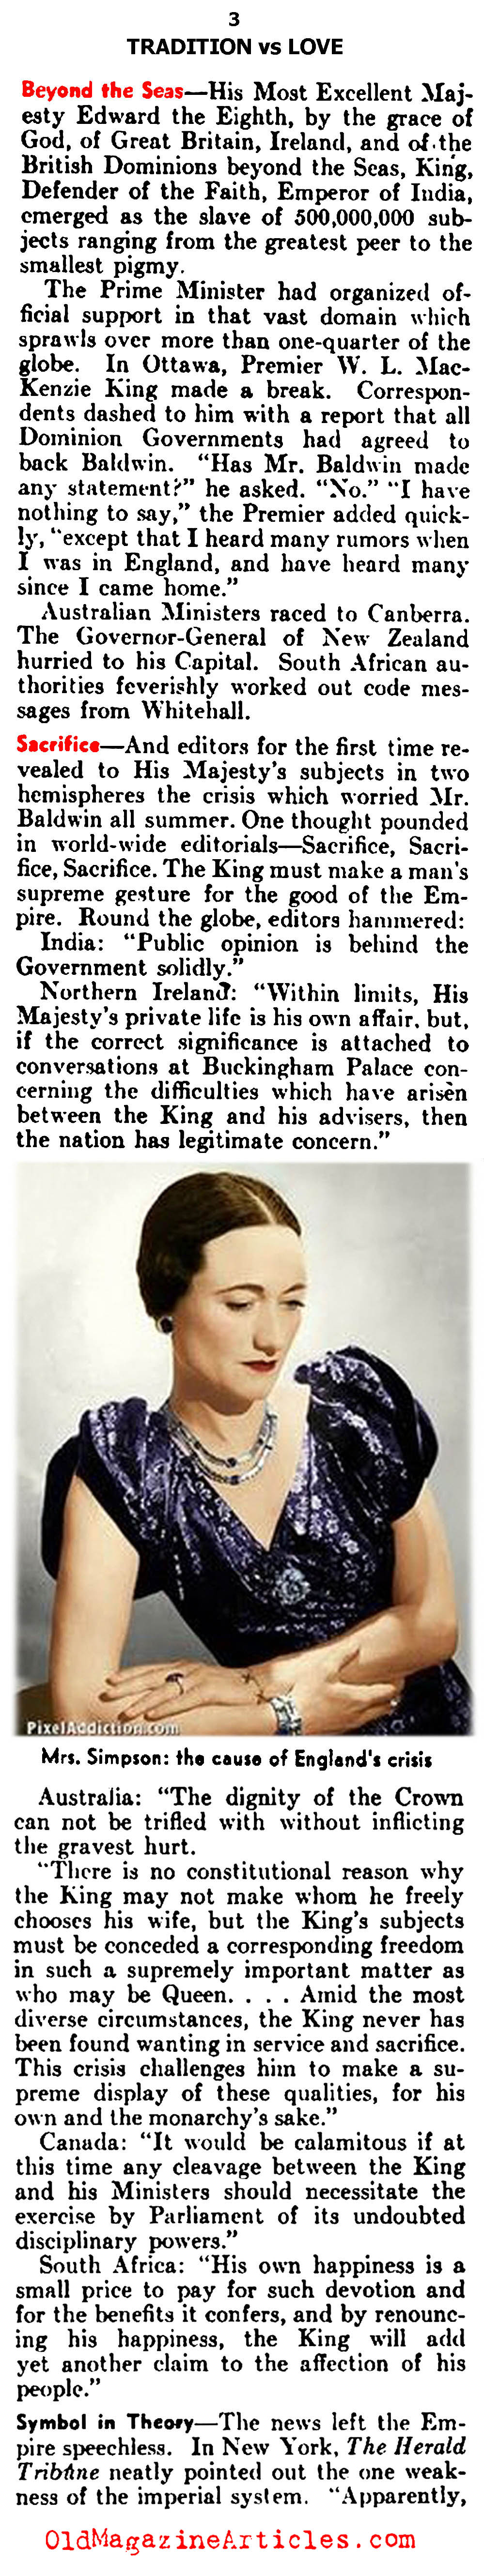 The Empire-Shaking Romance (Literary Digest, 1936)